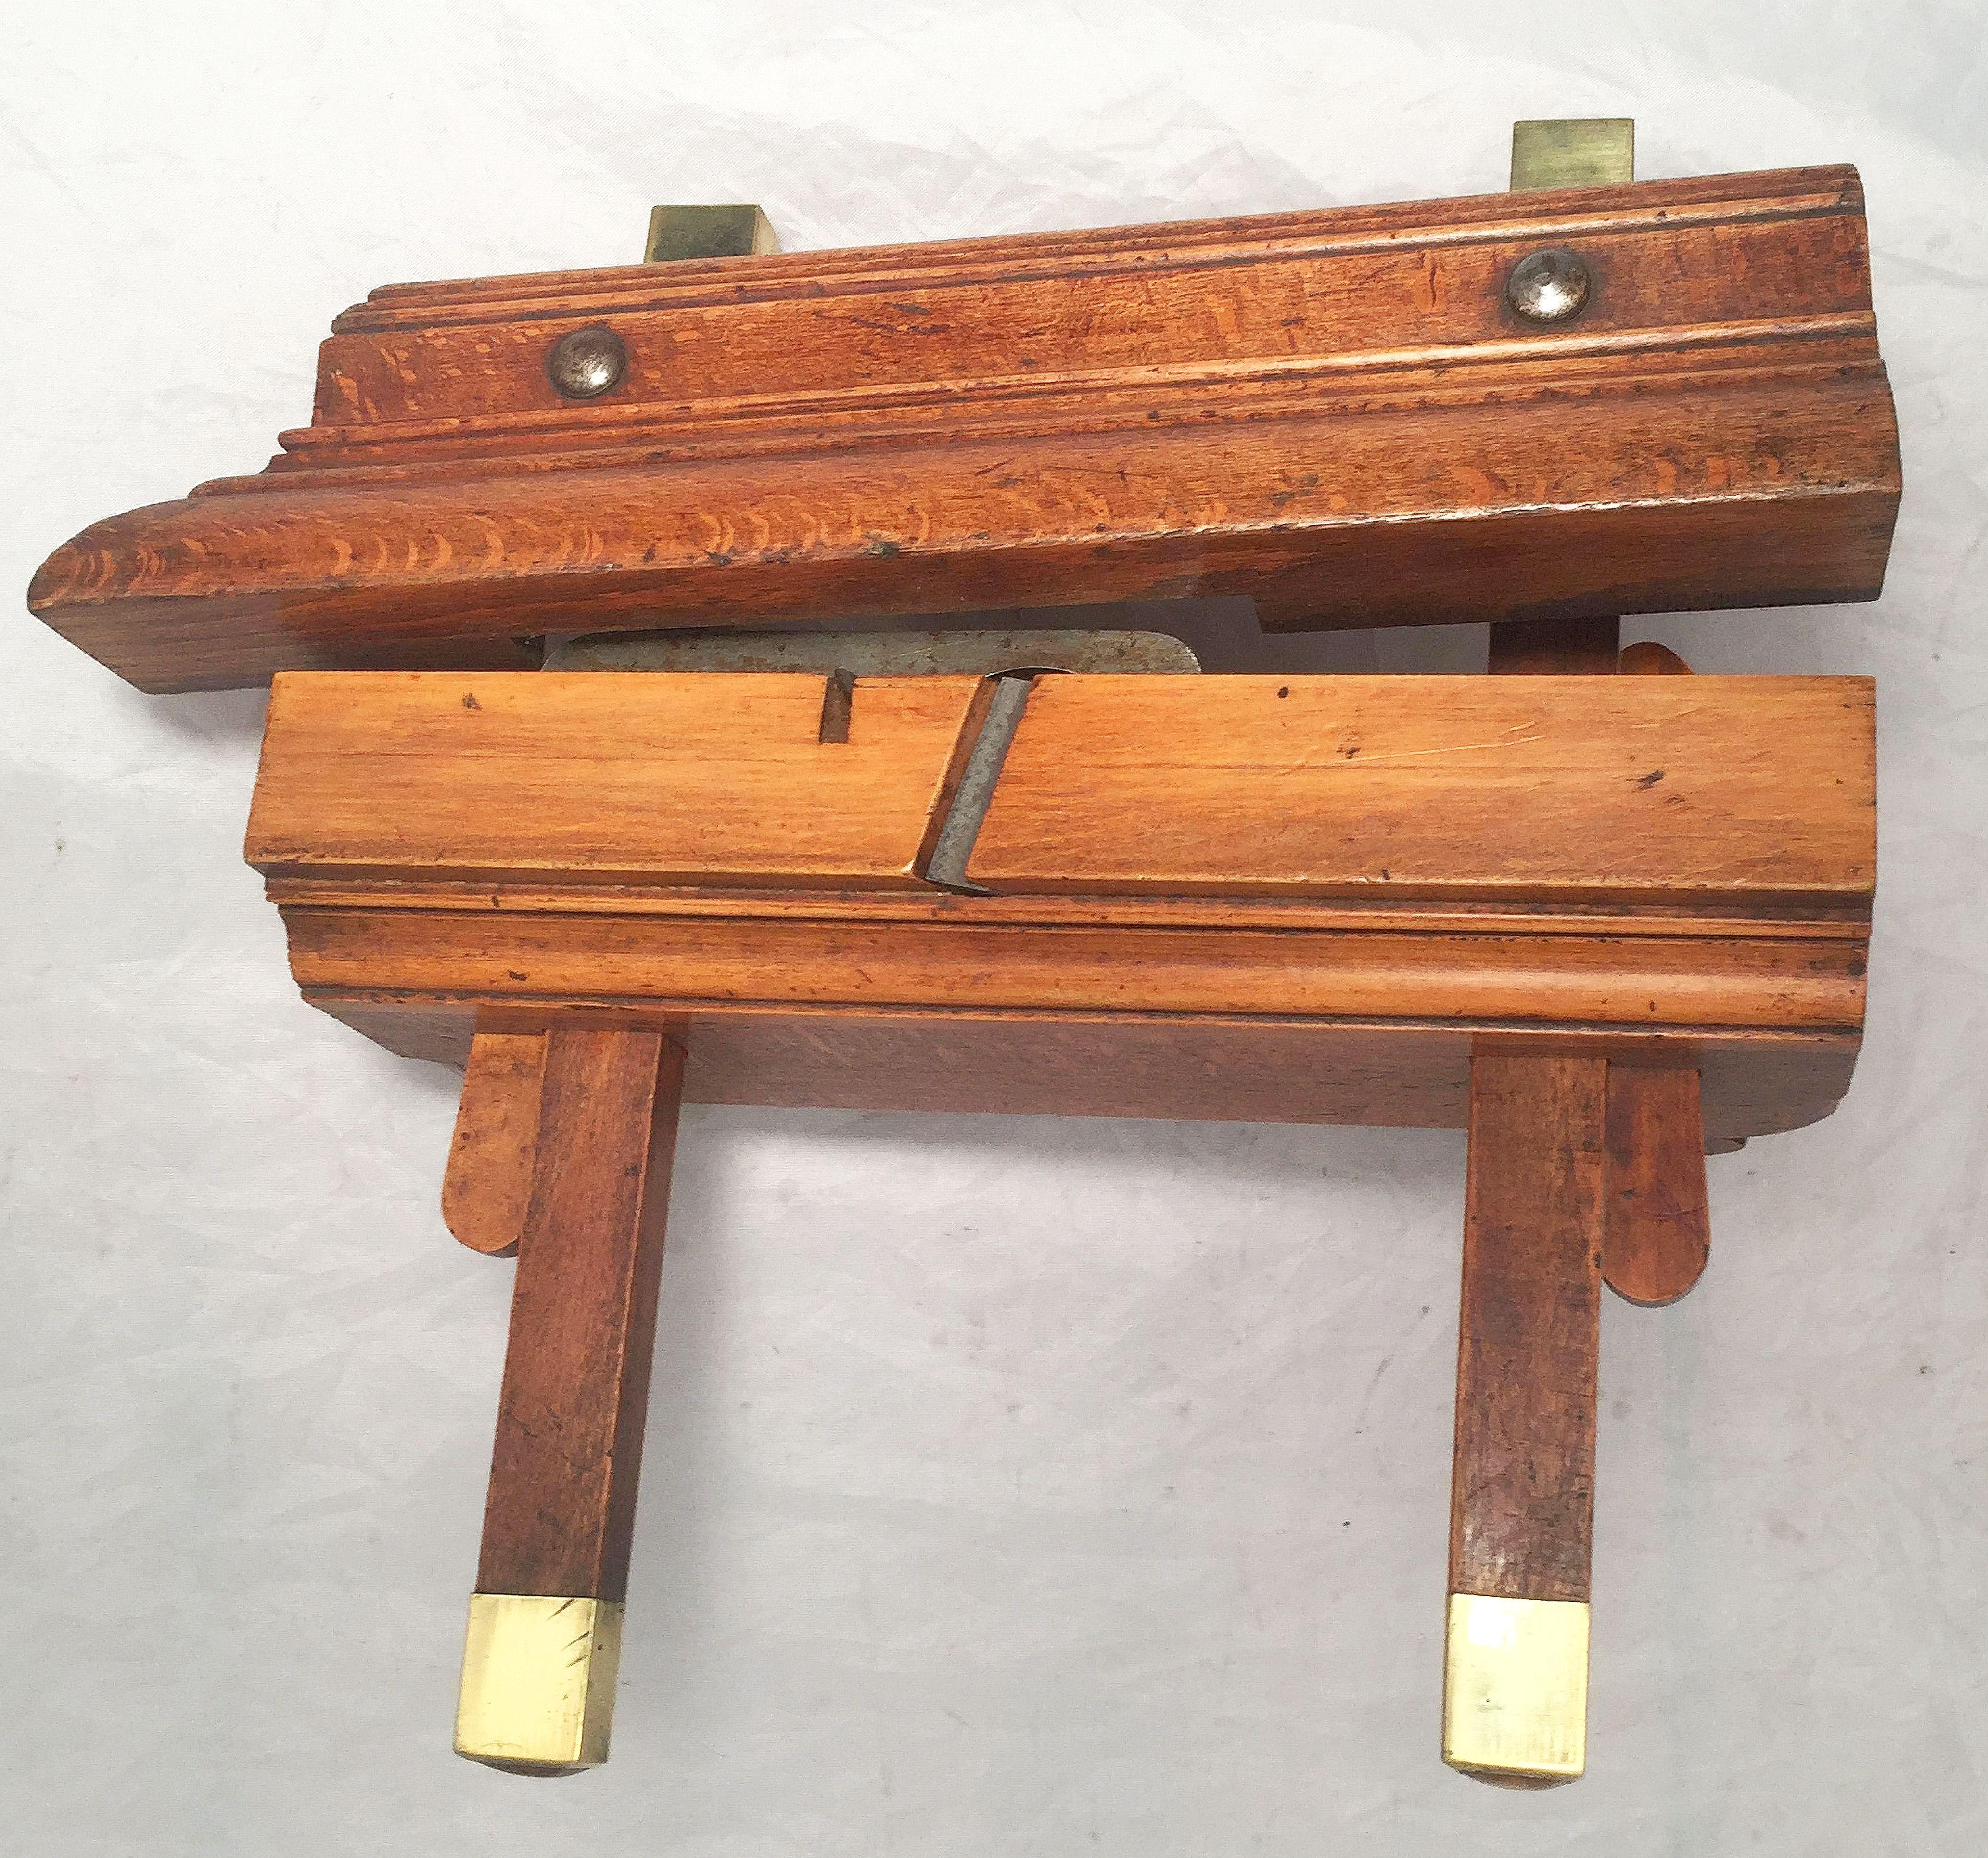 Metal English Shipwright's or Carpenter's Sash Fillister Plane by Atkin and Sons For Sale